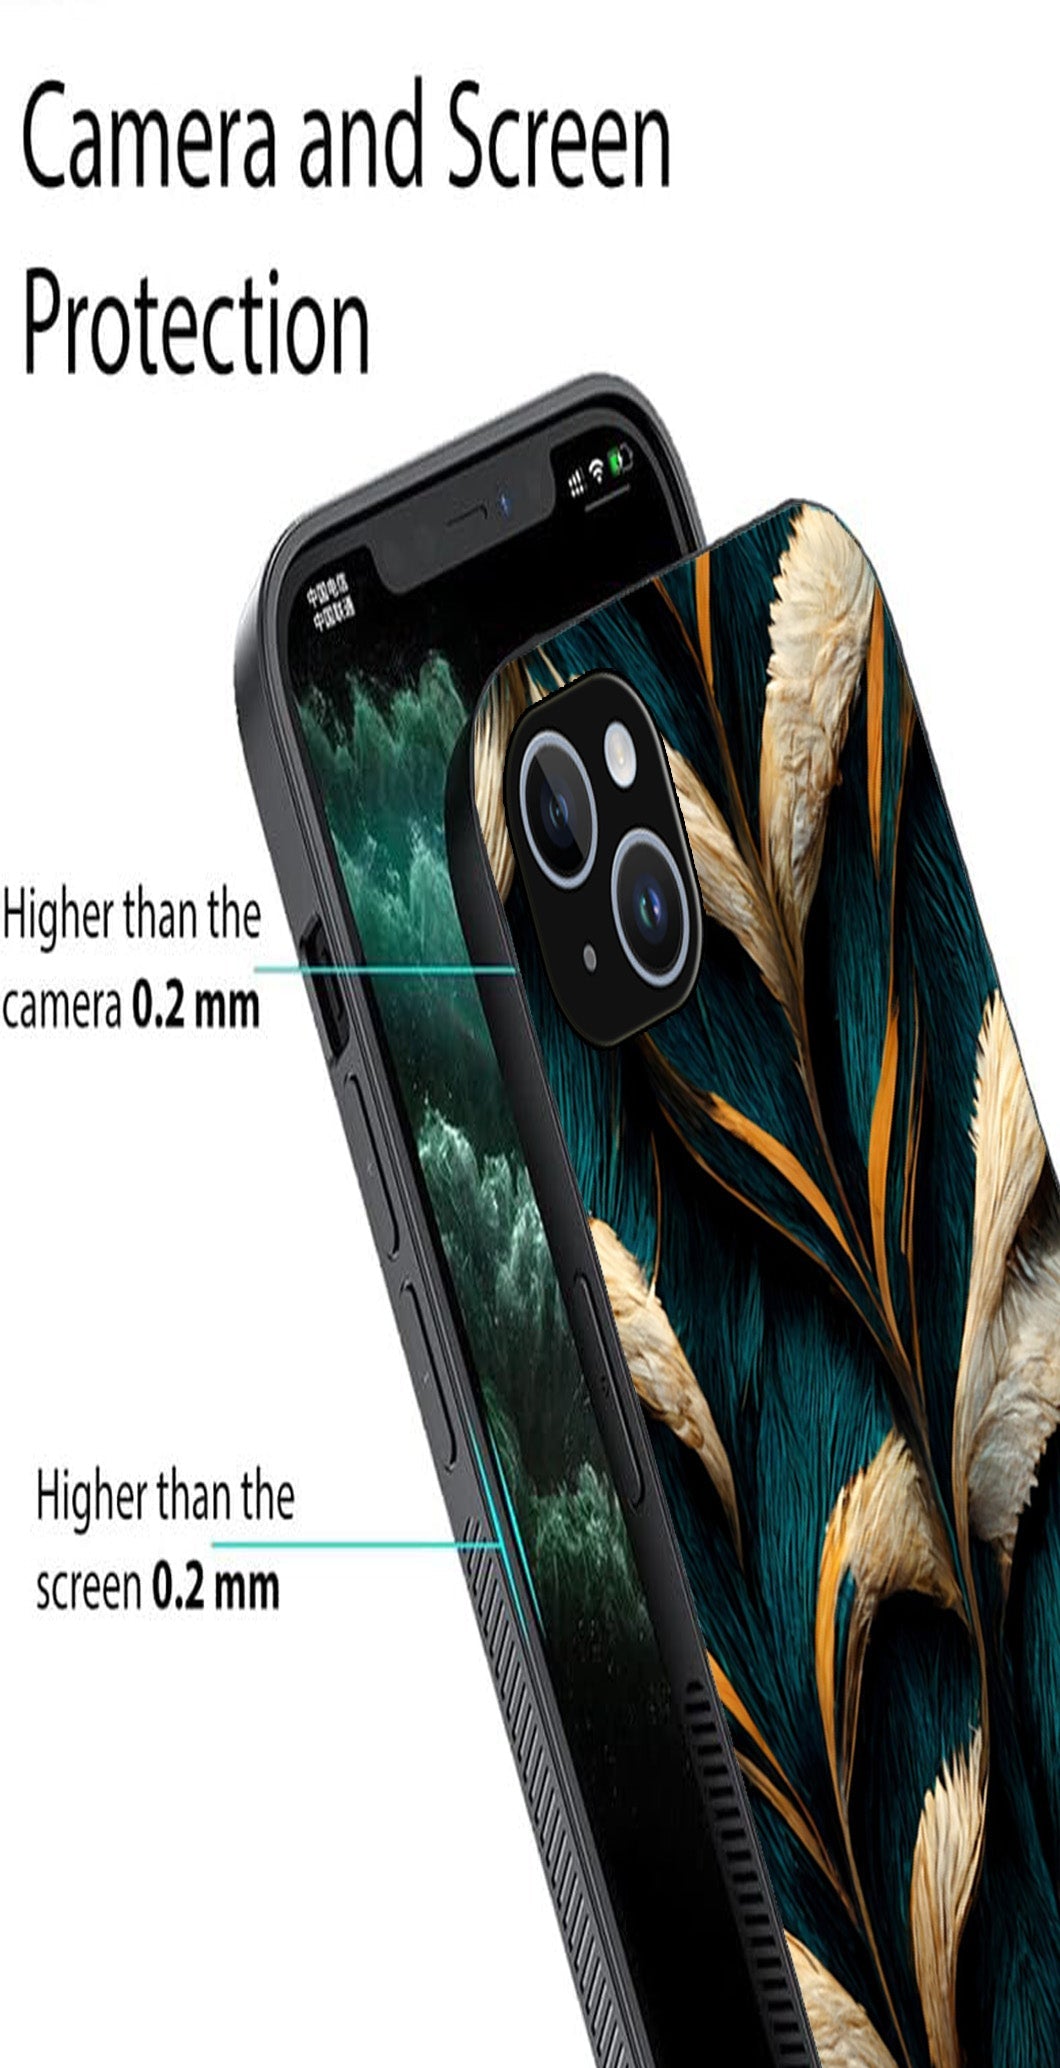 Feathers Metal Mobile Case for iPhone 13